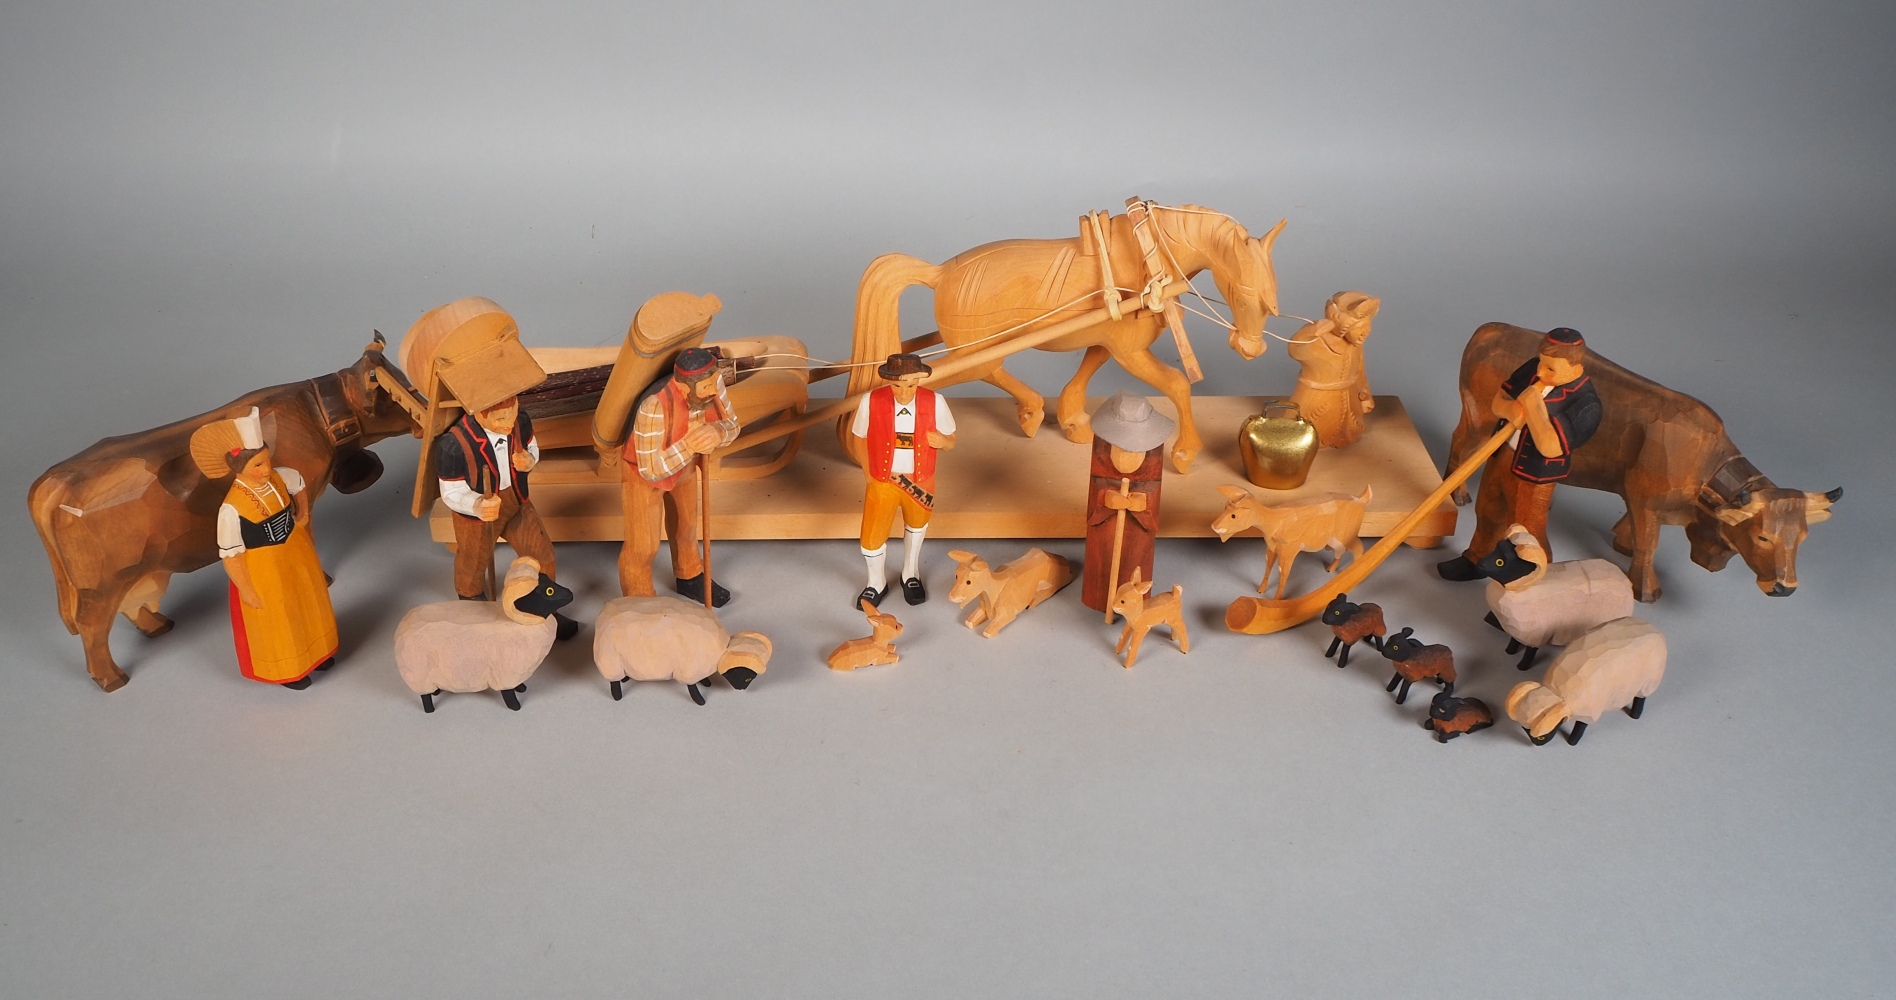 Mixed lot of carved wooden figures, probably Allgäu / Switzerland, 20th century - Image 2 of 2